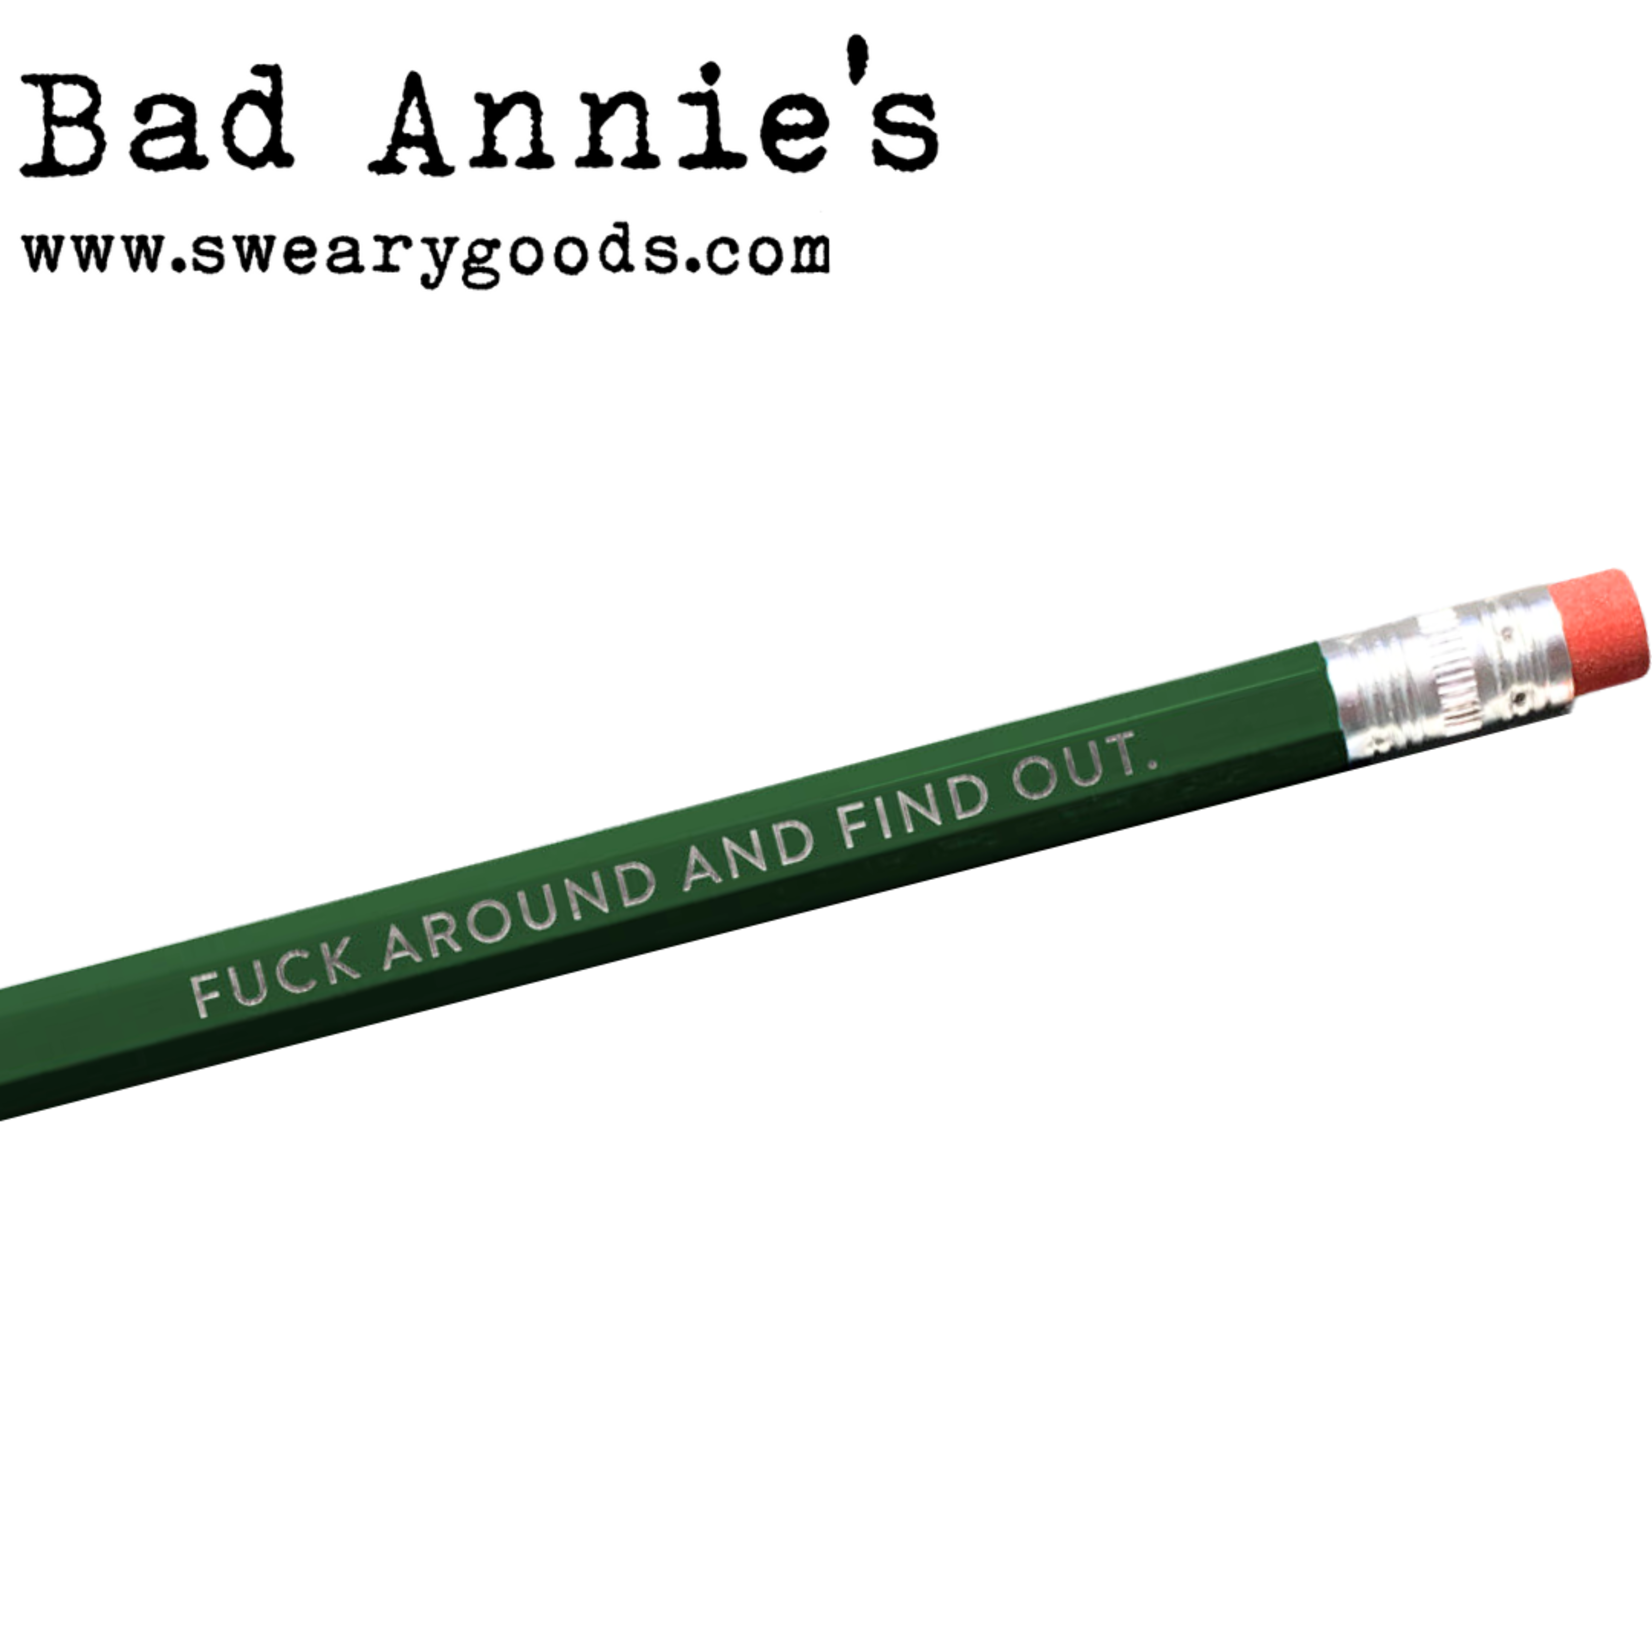 Pencil - Fuck Around And Find Out (Green/Silver)